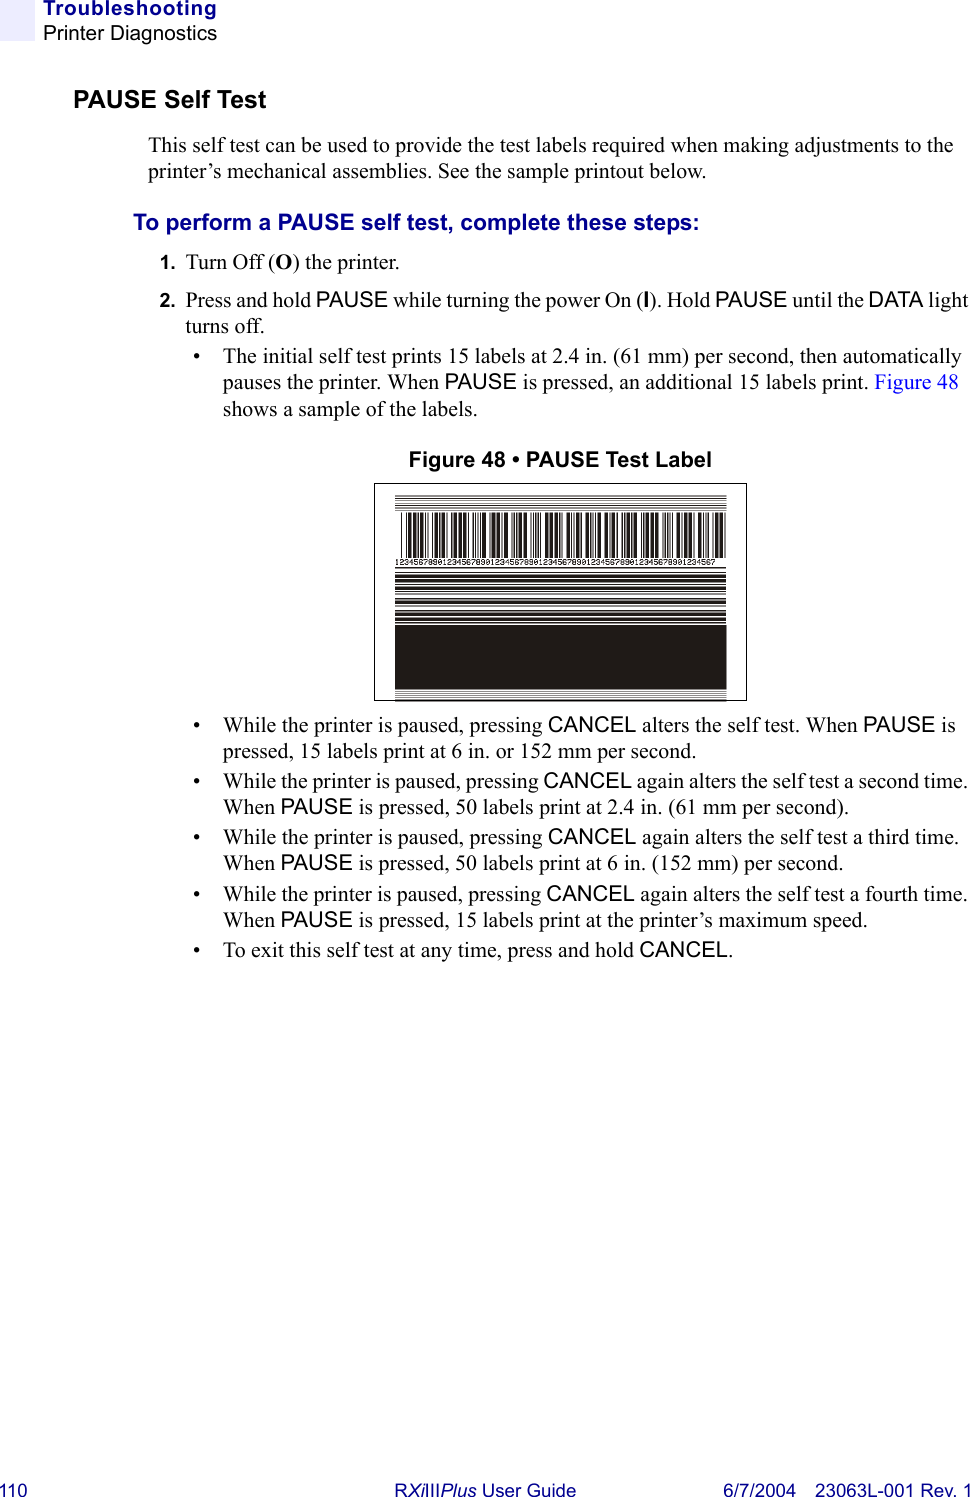 110 RXiIIIPlus User Guide 6/7/2004 23063L-001 Rev. 1TroubleshootingPrinter DiagnosticsPAUSE Self TestThis self test can be used to provide the test labels required when making adjustments to the printer’s mechanical assemblies. See the sample printout below.To perform a PAUSE self test, complete these steps:1. Turn Off (O) the printer.2. Press and hold PAUSE while turning the power On (I). Hold PAUSE until the DATA light turns off.• The initial self test prints 15 labels at 2.4 in. (61 mm) per second, then automatically pauses the printer. When PAUSE is pressed, an additional 15 labels print. Figure 48 shows a sample of the labels.Figure 48 • PAUSE Test Label• While the printer is paused, pressing CANCEL alters the self test. When PAUSE is pressed, 15 labels print at 6 in. or 152 mm per second.• While the printer is paused, pressing CANCEL again alters the self test a second time. When PAUSE is pressed, 50 labels print at 2.4 in. (61 mm per second).• While the printer is paused, pressing CANCEL again alters the self test a third time. When PAUSE is pressed, 50 labels print at 6 in. (152 mm) per second.• While the printer is paused, pressing CANCEL again alters the self test a fourth time. When PAUSE is pressed, 15 labels print at the printer’s maximum speed.• To exit this self test at any time, press and hold CANCEL.